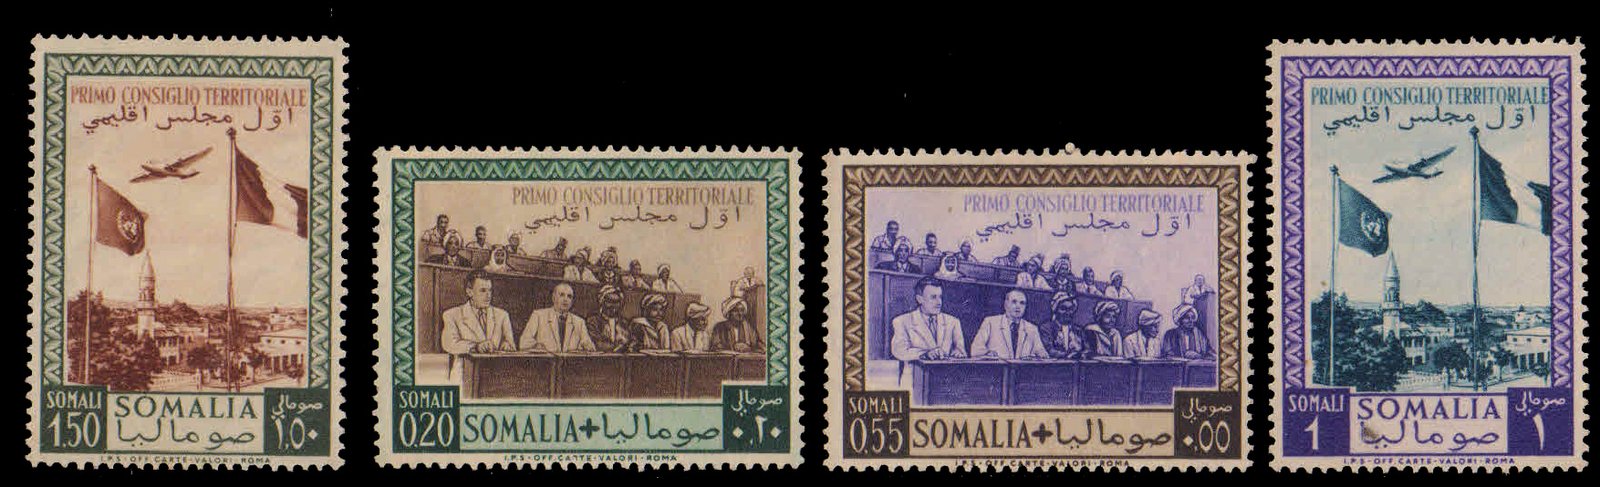 SOMALIA 1951-1st Territorial Council, Flags, Aircraft oversuspicious, Set of 4, MNH, S.G. 255-258, Cat £ 40-